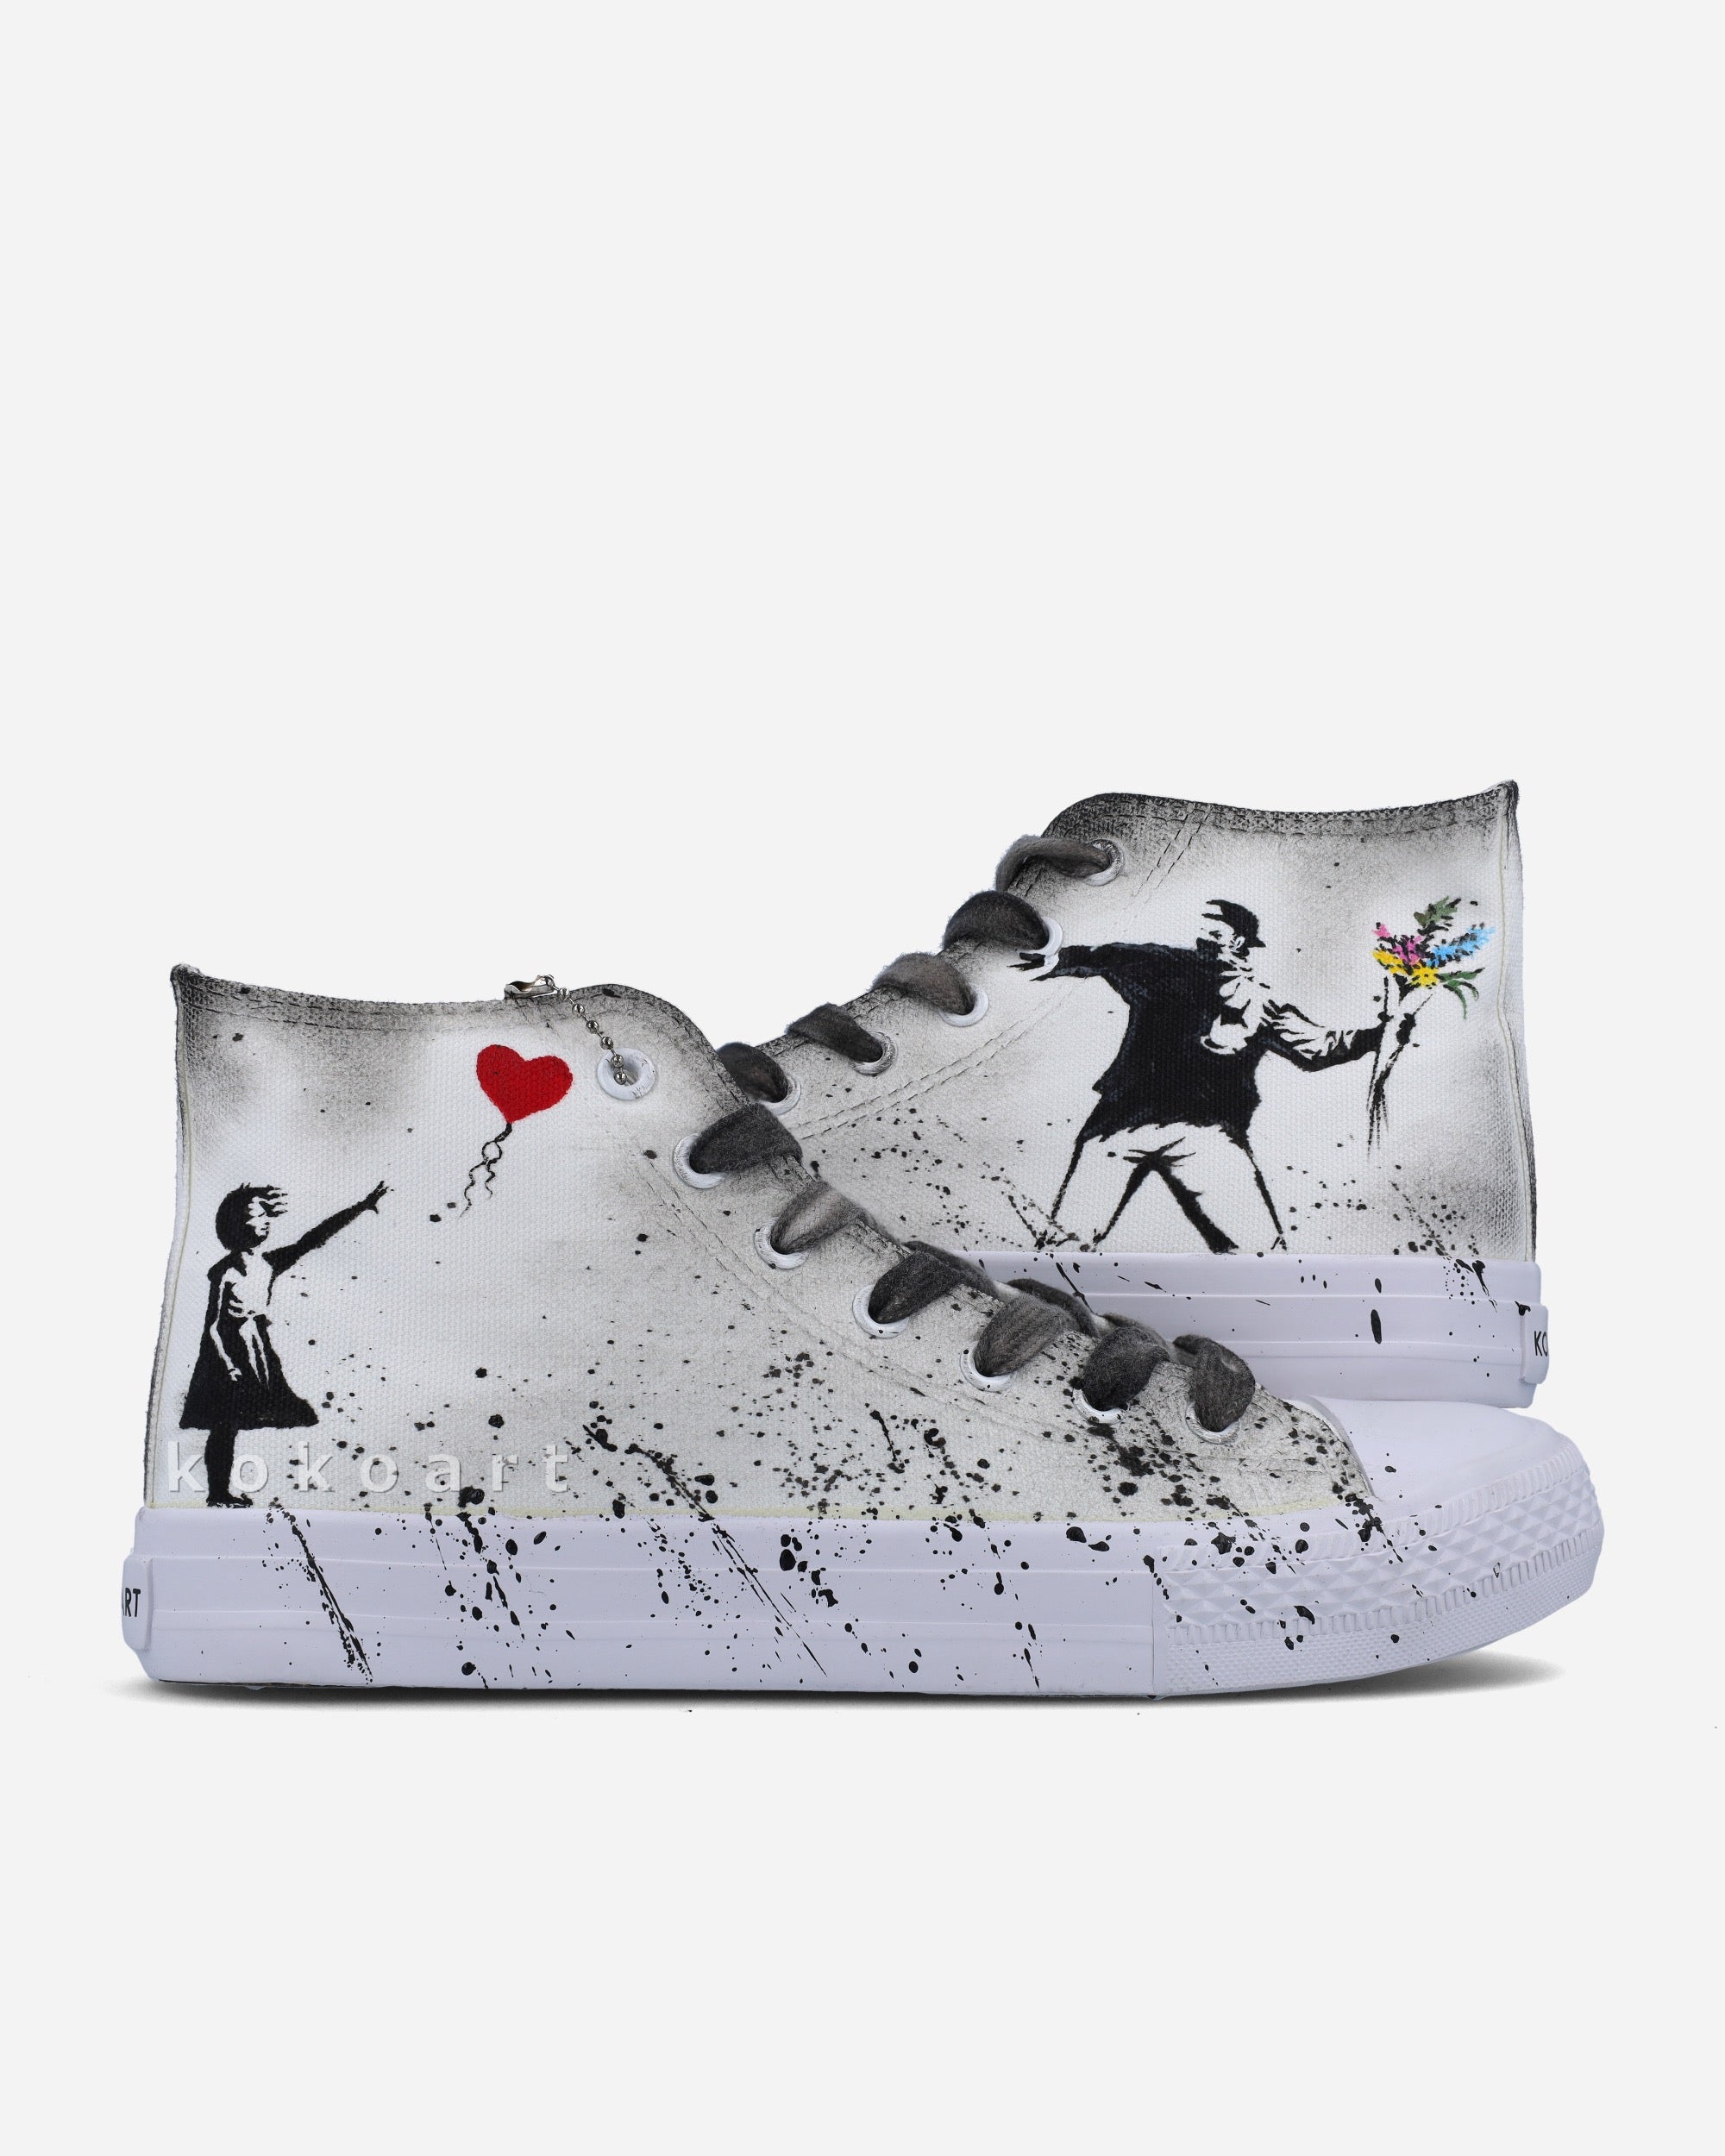 Banksy Girl with Balloon and Flower Thrower Hand Painted Shoes